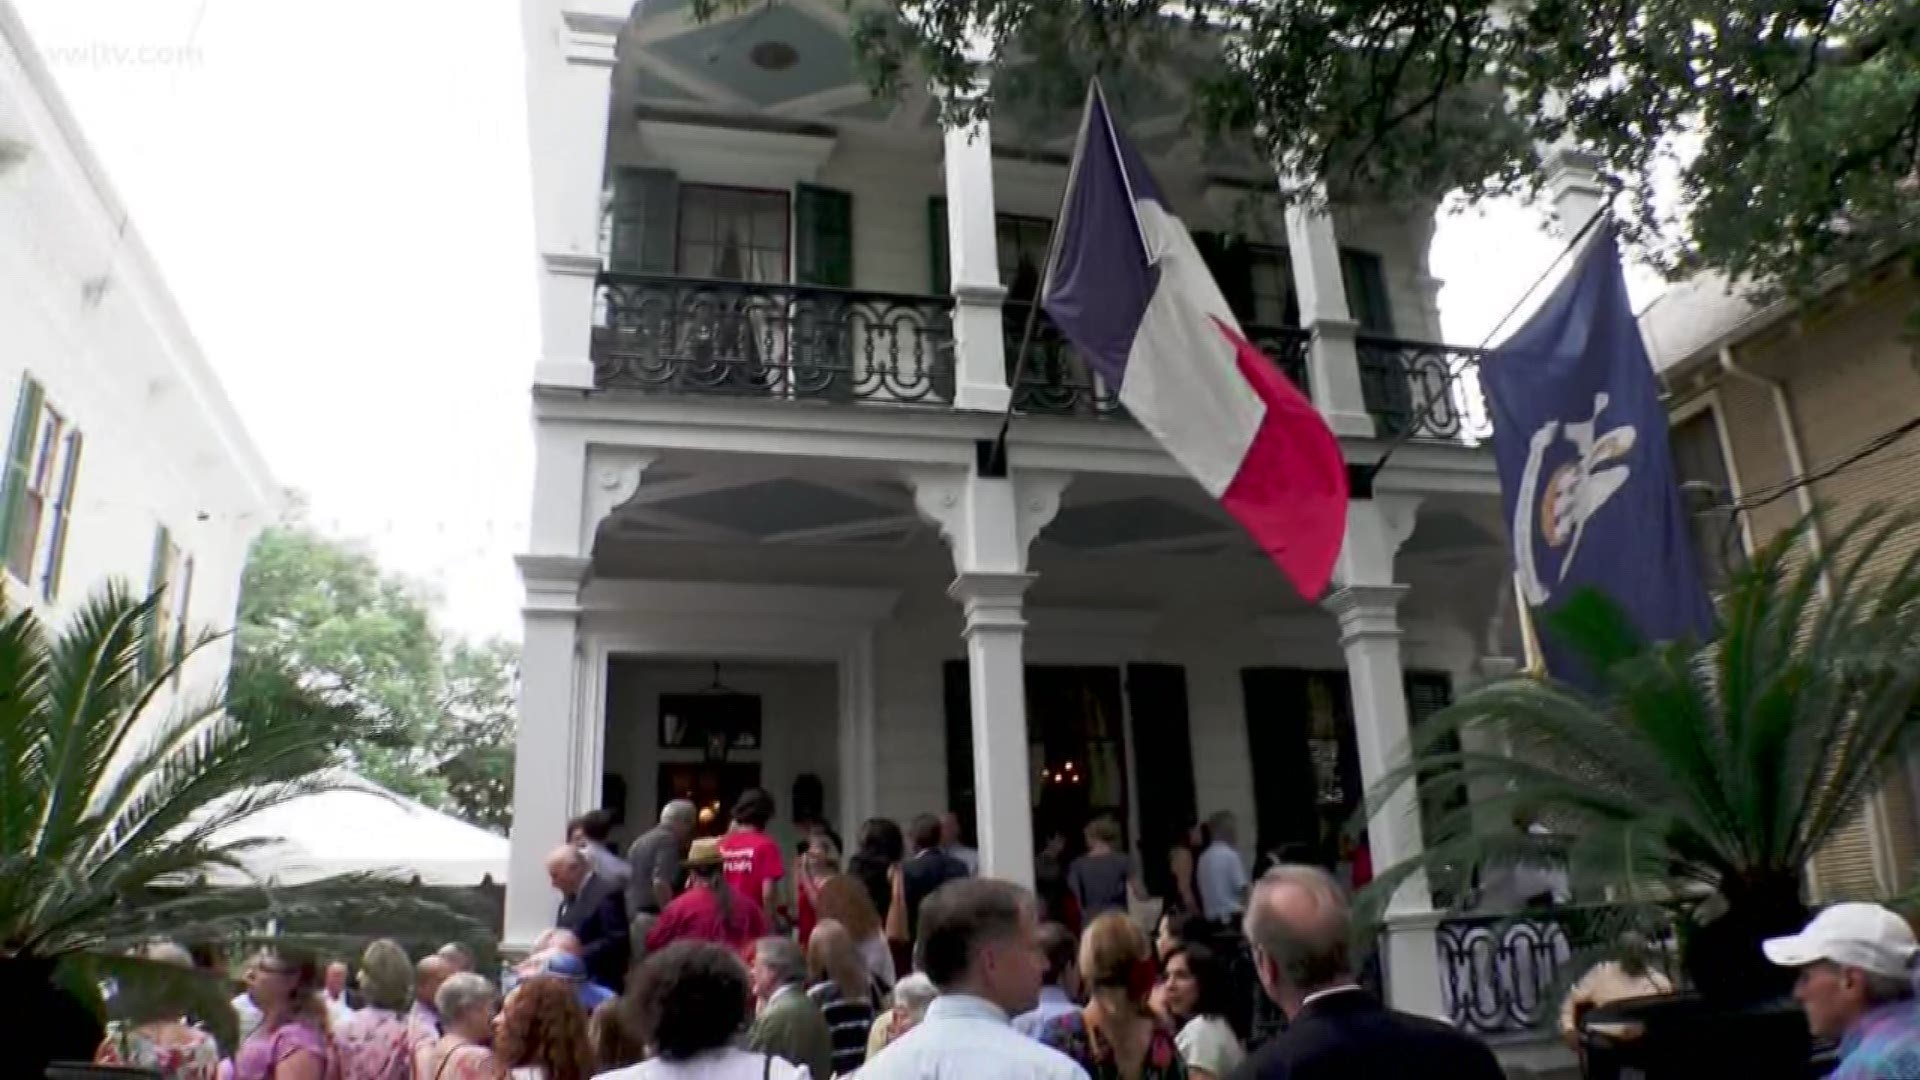 French Ambassador to the United States, Philippe Etienne, visited Degas House in New Orleans on July 15 to celebrate the painter's 185th birthday and recognize the local landmark as one of the "Maisons des Illustres," or important French cultural sites.